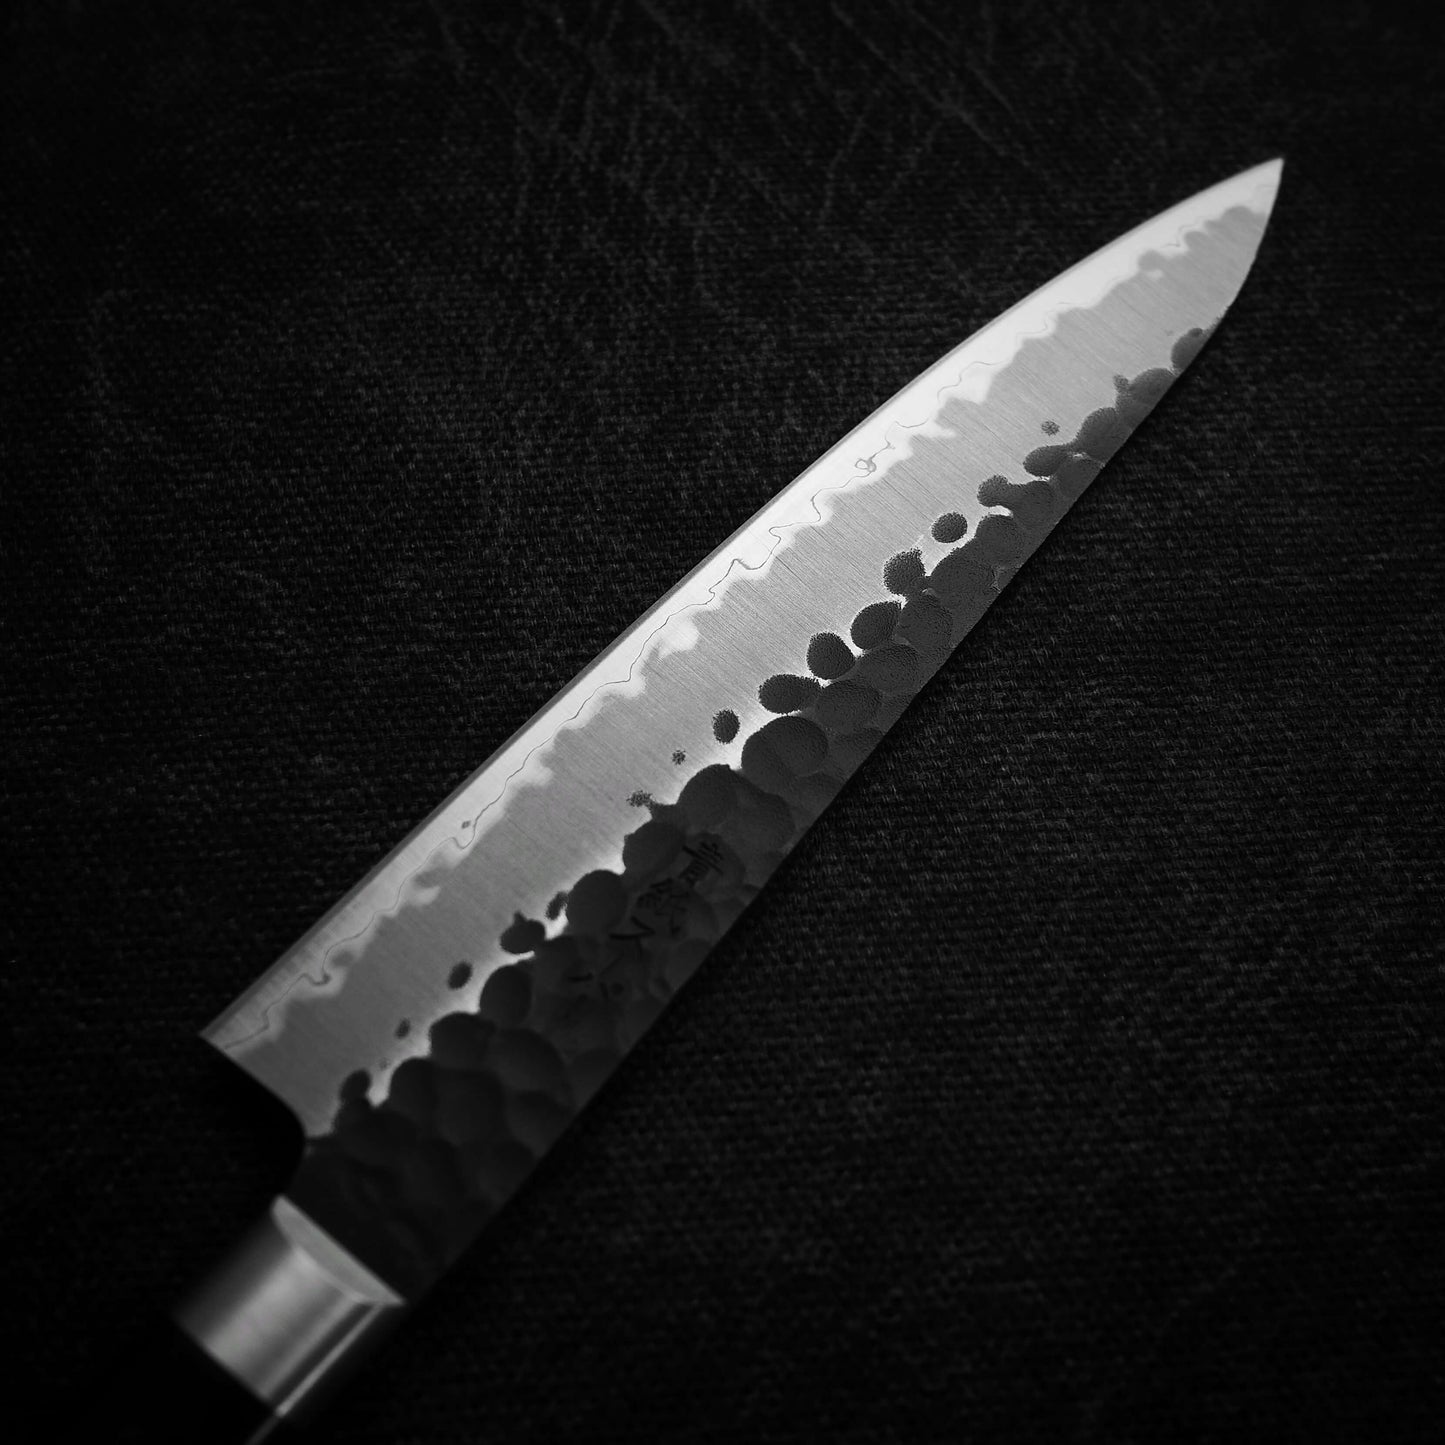 Top view of the blade of Ittosai Kotetsu tsuchime kurouchi aogami super petty knife. Image shows the left side of the knife